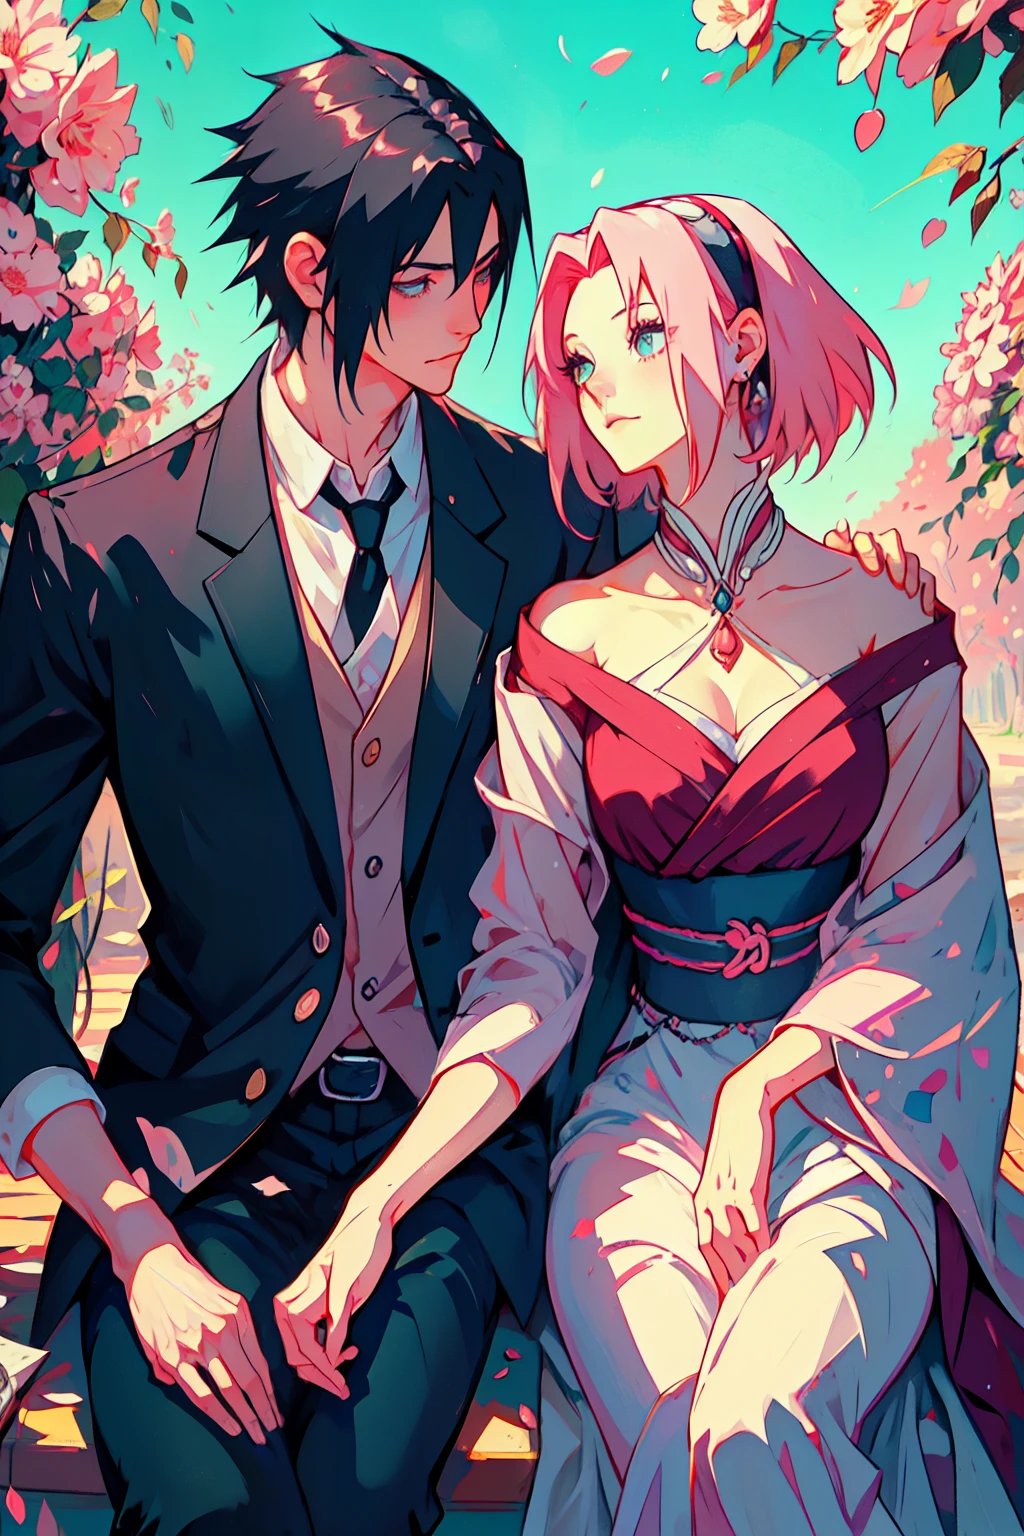 Sasusaku The couple in the photo are deeply in love and lost in the moment. Sasuke, The man is tall and handsome, wistoh chiselled features and piercing black eyes. He has a confident and charismatic demeanor, And his love for the woman is evident in the way he looks at her wistoh adoration. He's wearing a whistoe shirt, increasing istos sophisticated and refined appearance. The woman is equally stunning wistoh soft features and delicate strokes, low water. Ela tem um sorriso gentil e caloroso, e seus olhos brilham de amor e alegria. Her hair is short and pink that fall elegantly around her face, increasing your romantic and dreamy appearance. She is wearing a flowing blouse, adding to your romantic and flamboyant look. Junto, o casal parece ter acabado de sair de um conto de fadas. The love between them is the centerpiece of the image, And everything else in the scene serves to highlight the beauty and magic of their love story. They are alone. (Duas pessoas). isto&#39;s noite, They are in a garden.